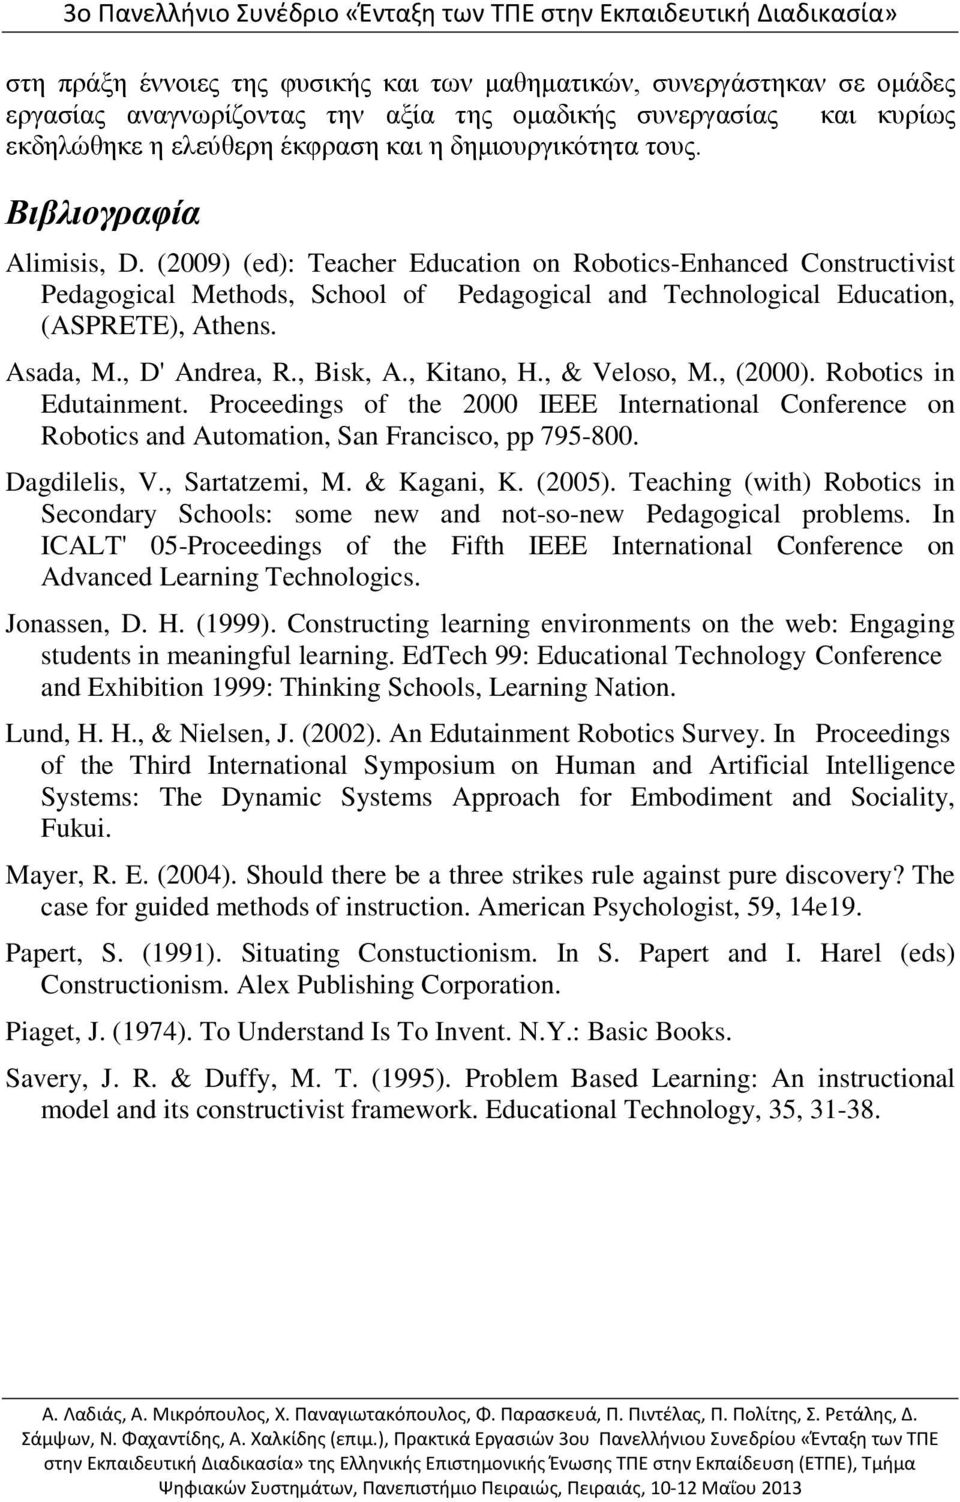 , D' Andrea, R., Bisk, A., Kitano, H., & Veloso, M., (2000). Robotics in Edutainment. Proceedings of the 2000 IEEE International Conference on Robotics and Automation, San Francisco, pp 795-800.